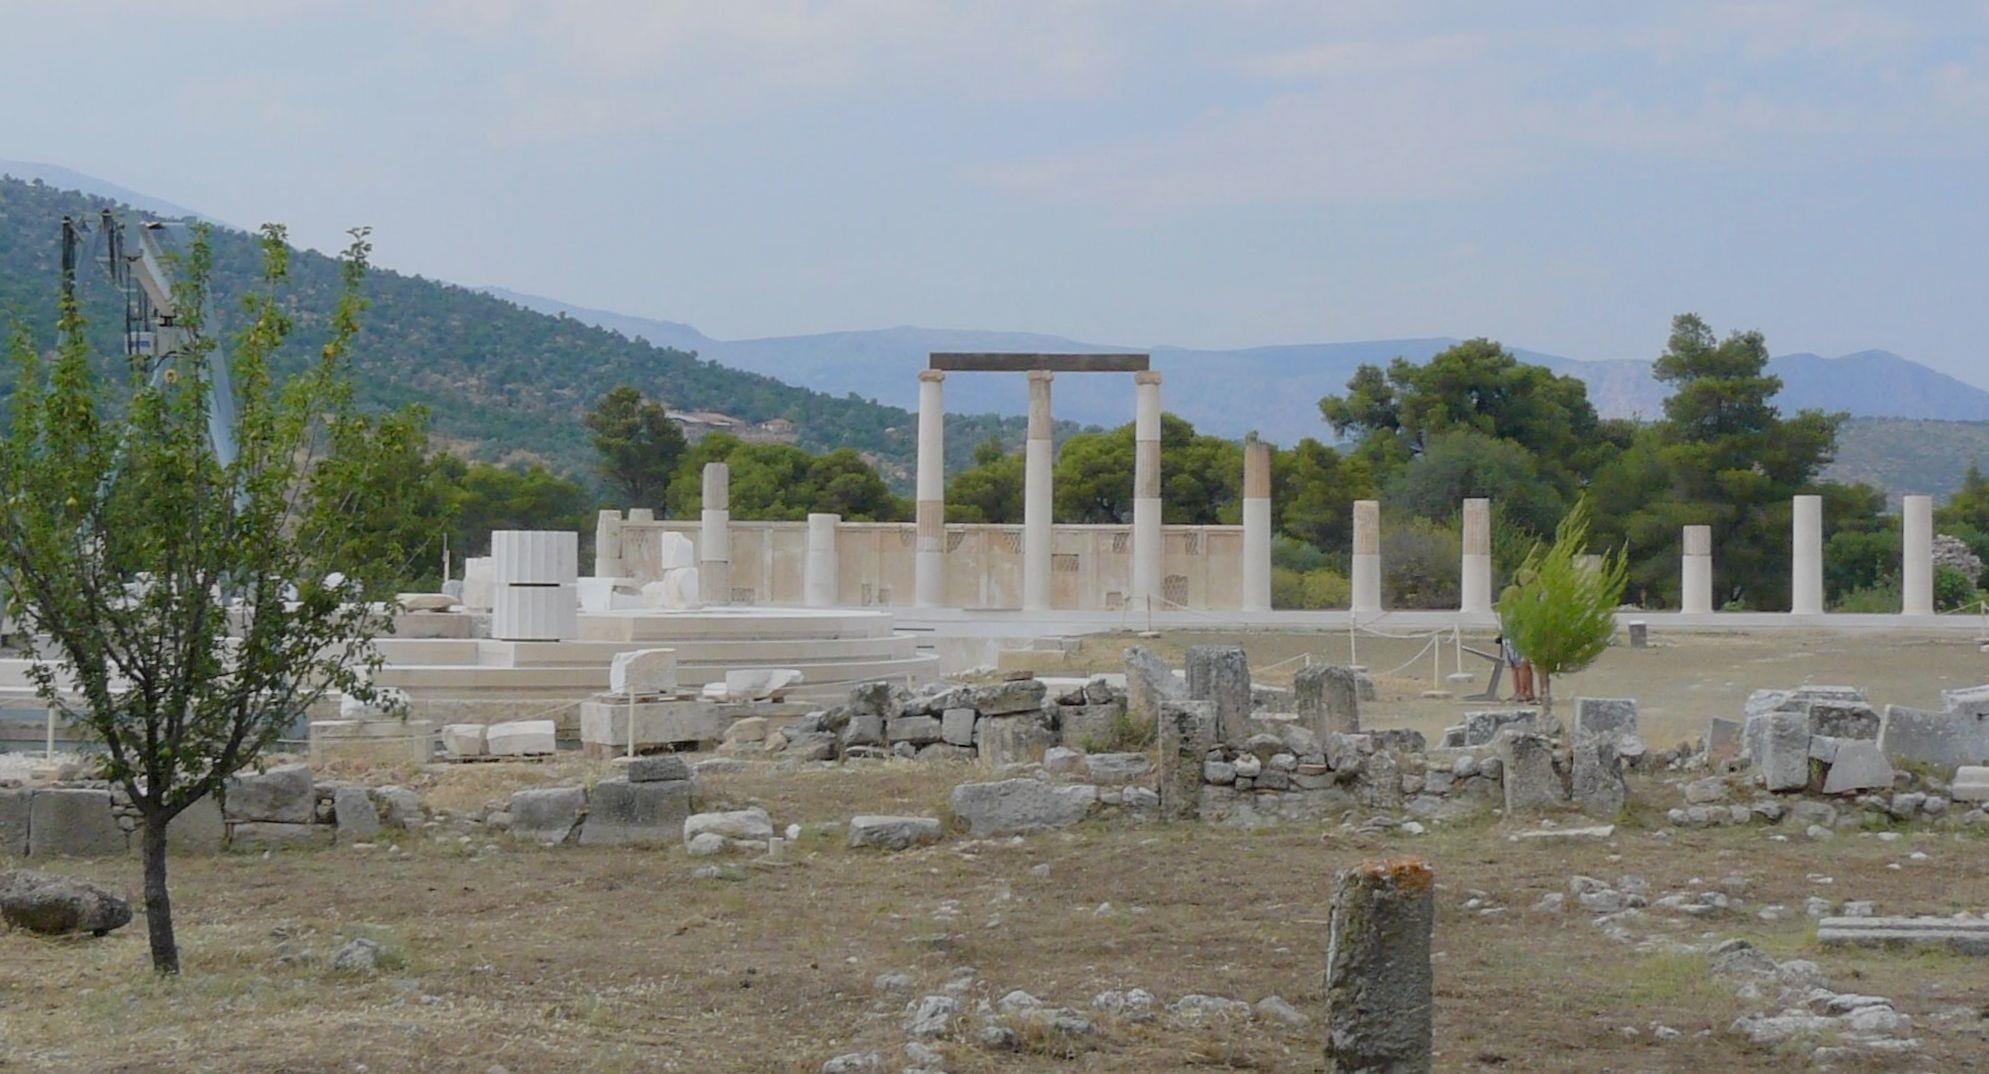 In the Αbaton (i.e. not to be trodden) or Enkoimeterion (i.e. dormitory) patients were induced to a dream-like sleep to receive the miracle cure by the god ASKLEPIEION OF EPIDAURUS (Ancient sanctuary) ARGOLIS